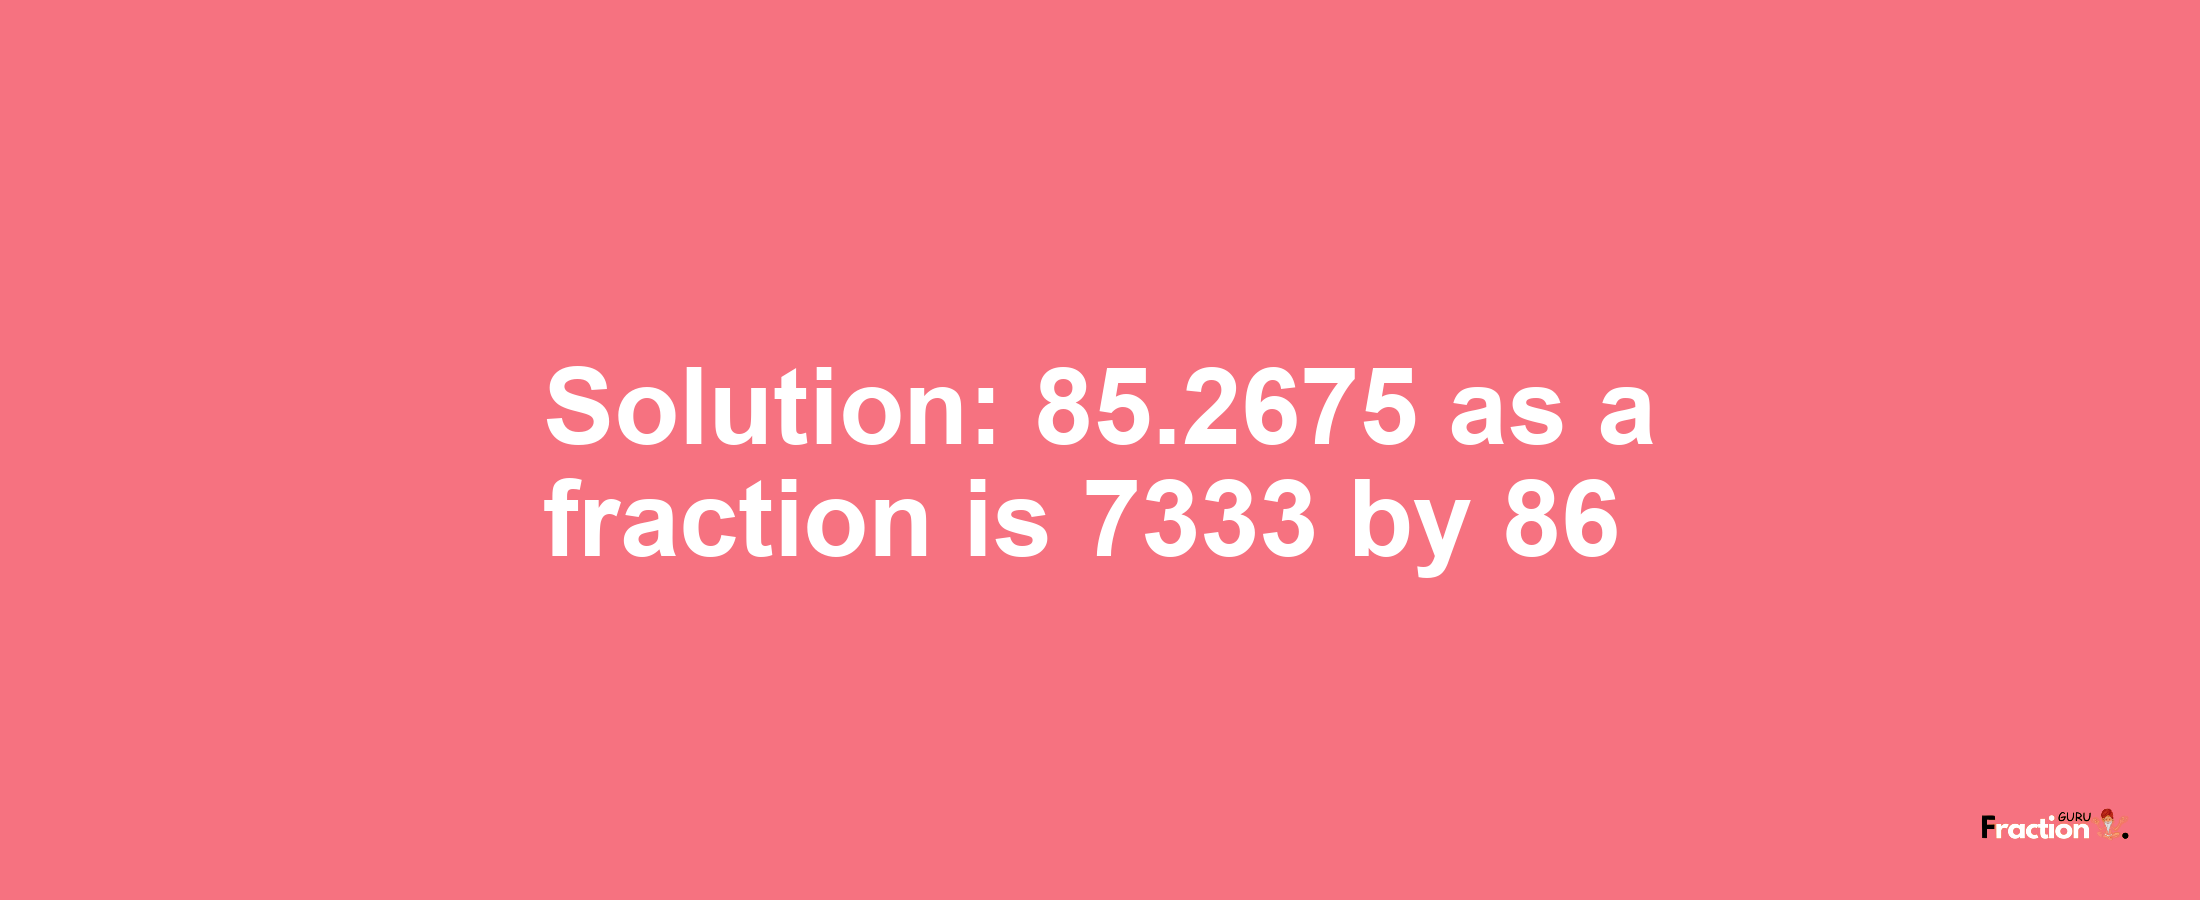 Solution:85.2675 as a fraction is 7333/86